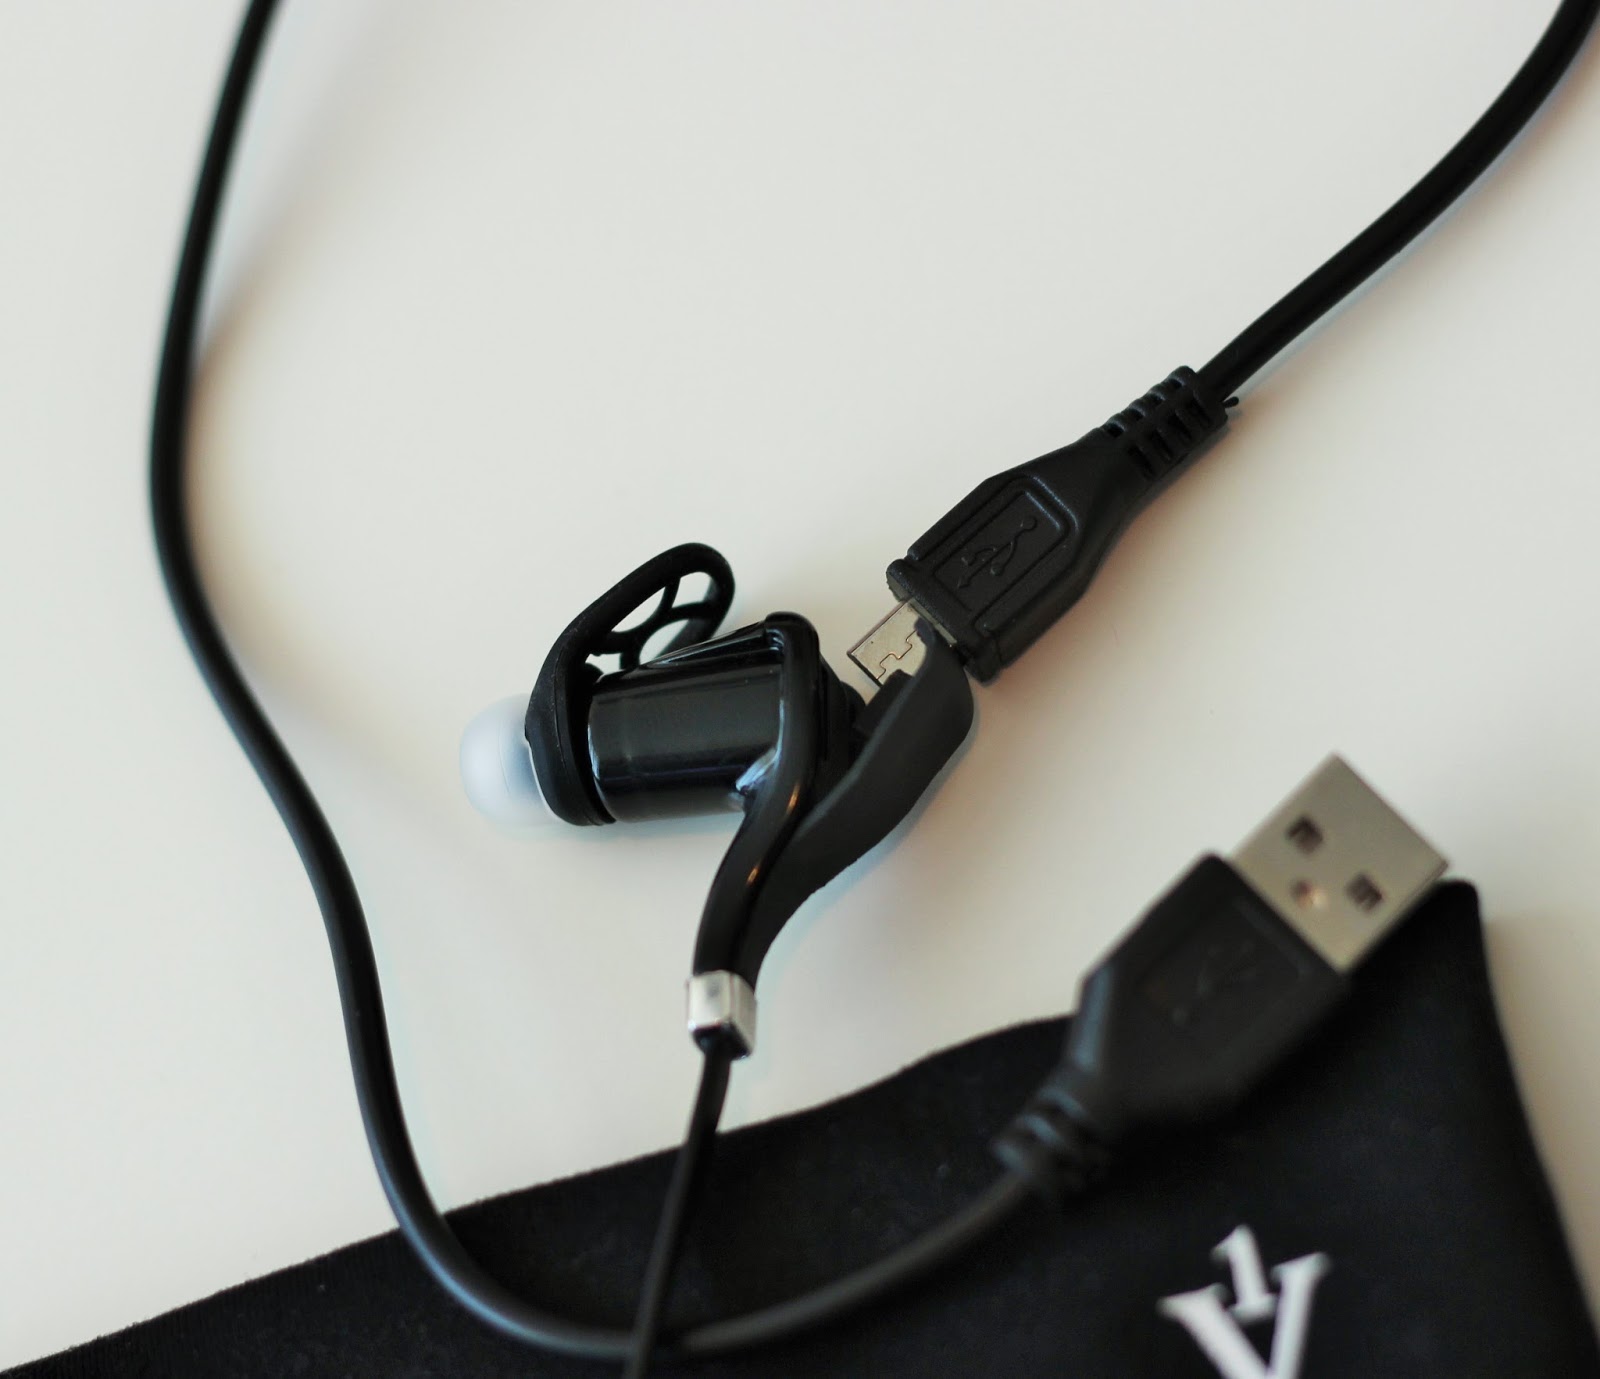 REVIEW: 1 VOICE HEADBAND WITH BUILT-IN WIRELESS EARBUDS 